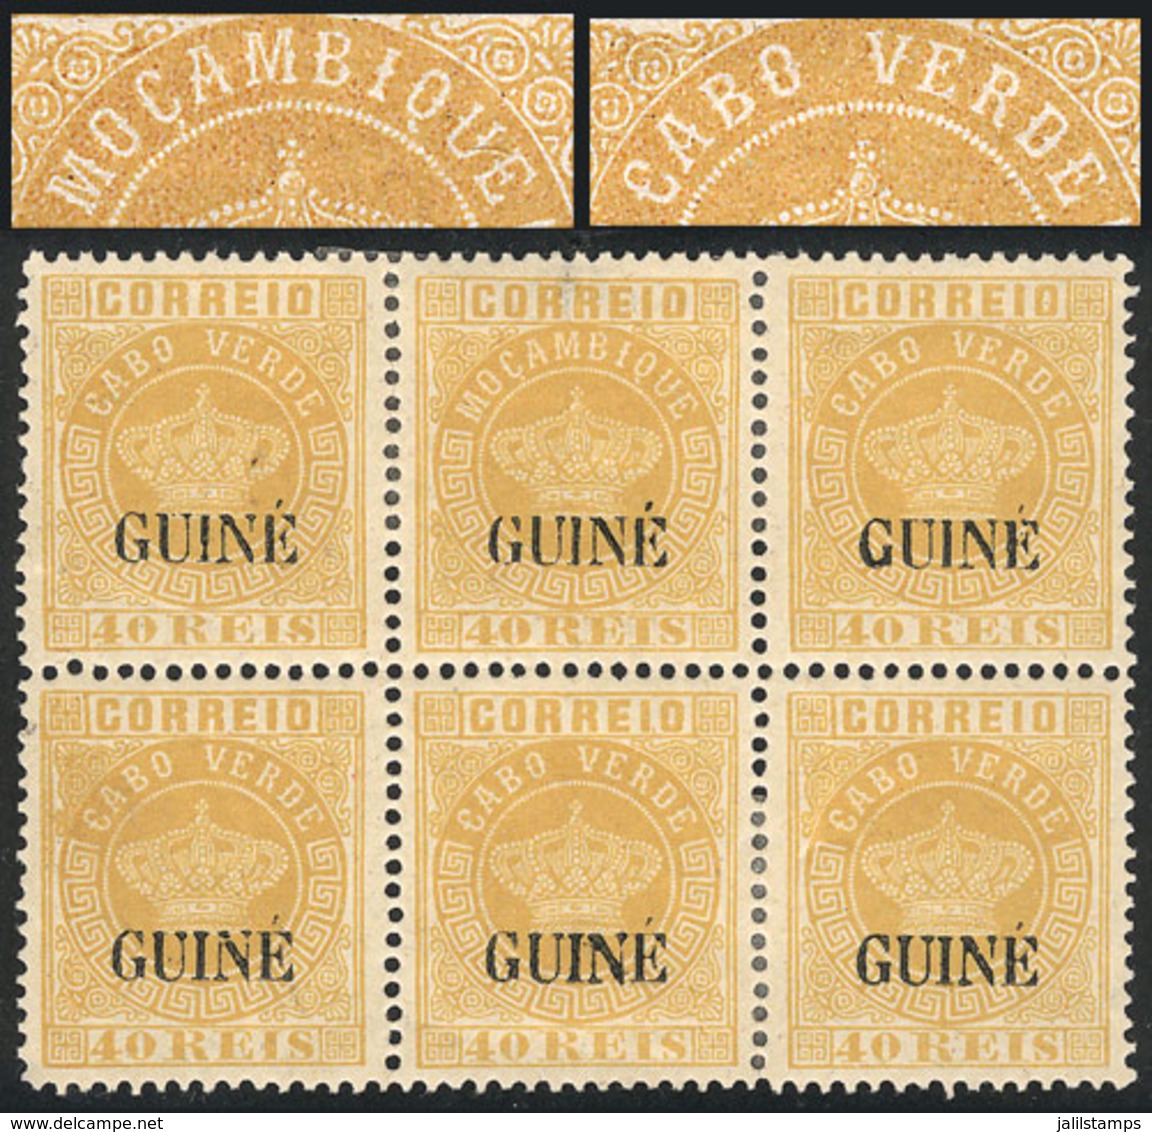 PORTUGUESE GUINEA: Sc.16a, 1881/5 40r. Yellow, Block Of 6, One Inscribed With "Mozambique" Error, VF Quality, Very Nice! - Portuguese Guinea